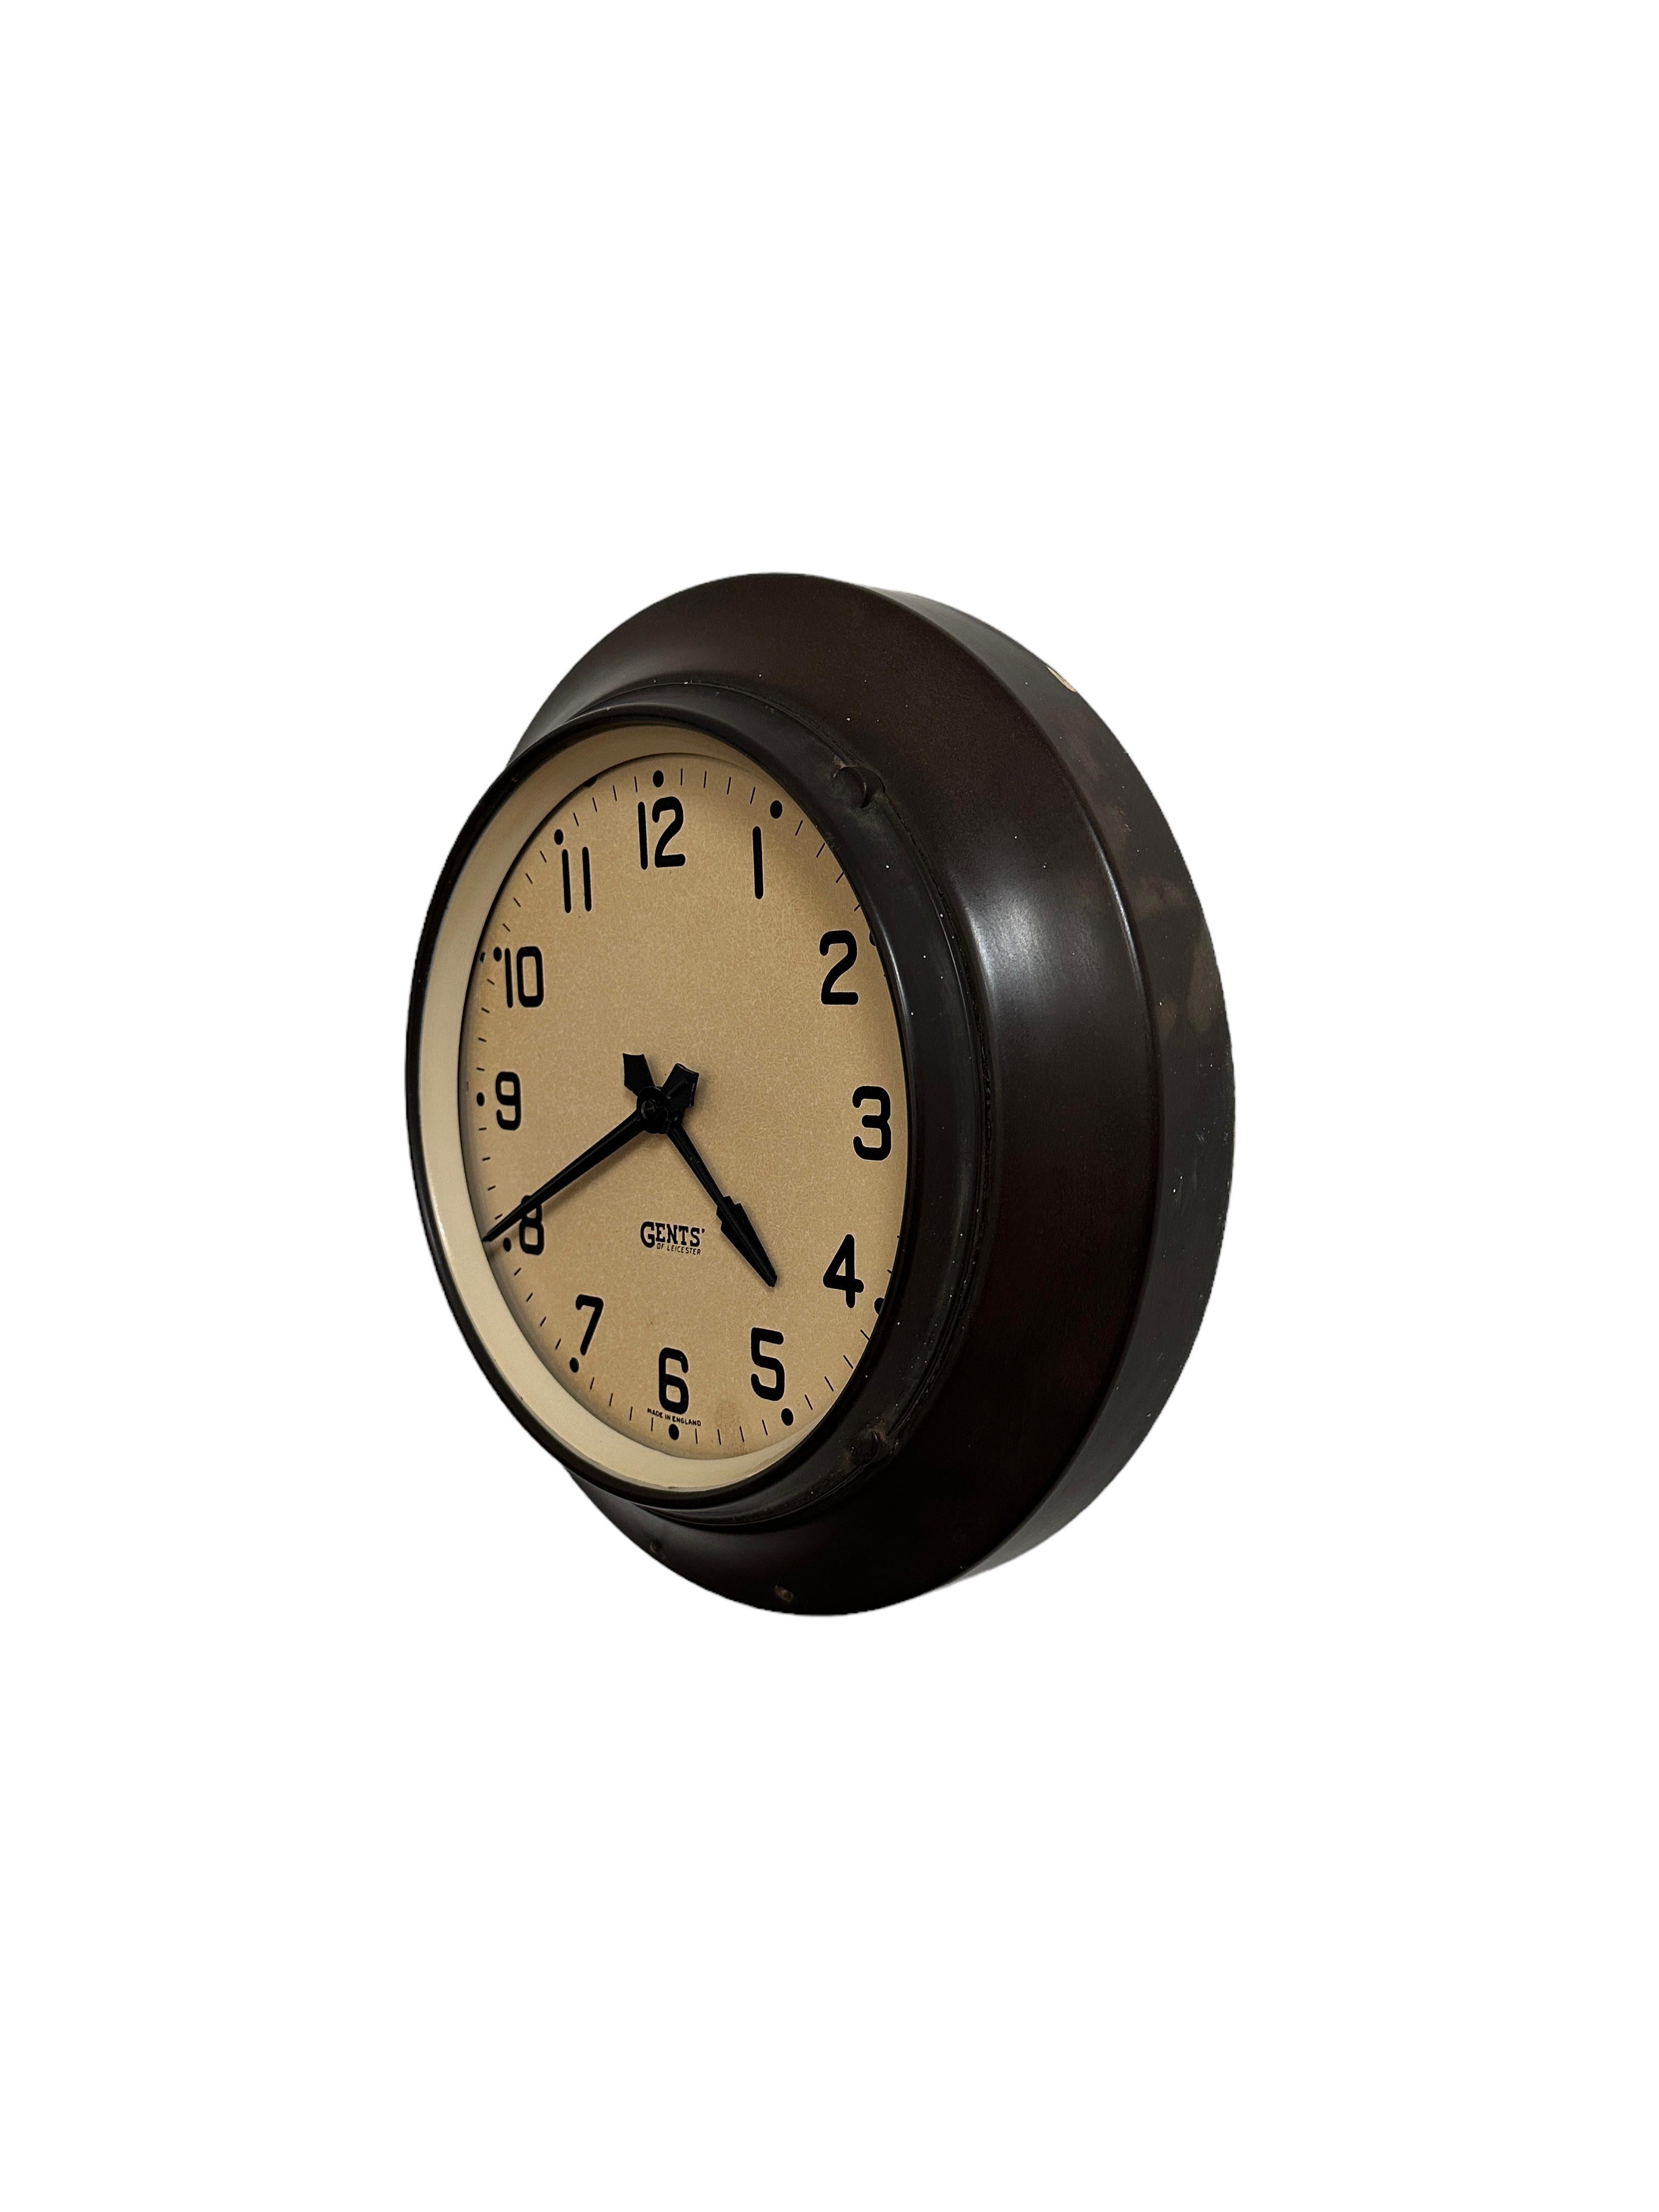 - A wonderful Gents' of Leicester factory wall clock, English circa 1940. 
- Beautifully presented, original glass and hands across the face.
- A rich dark brown bakelite casing which is of a rare and unusual design, seldom seen. 
- The clock has